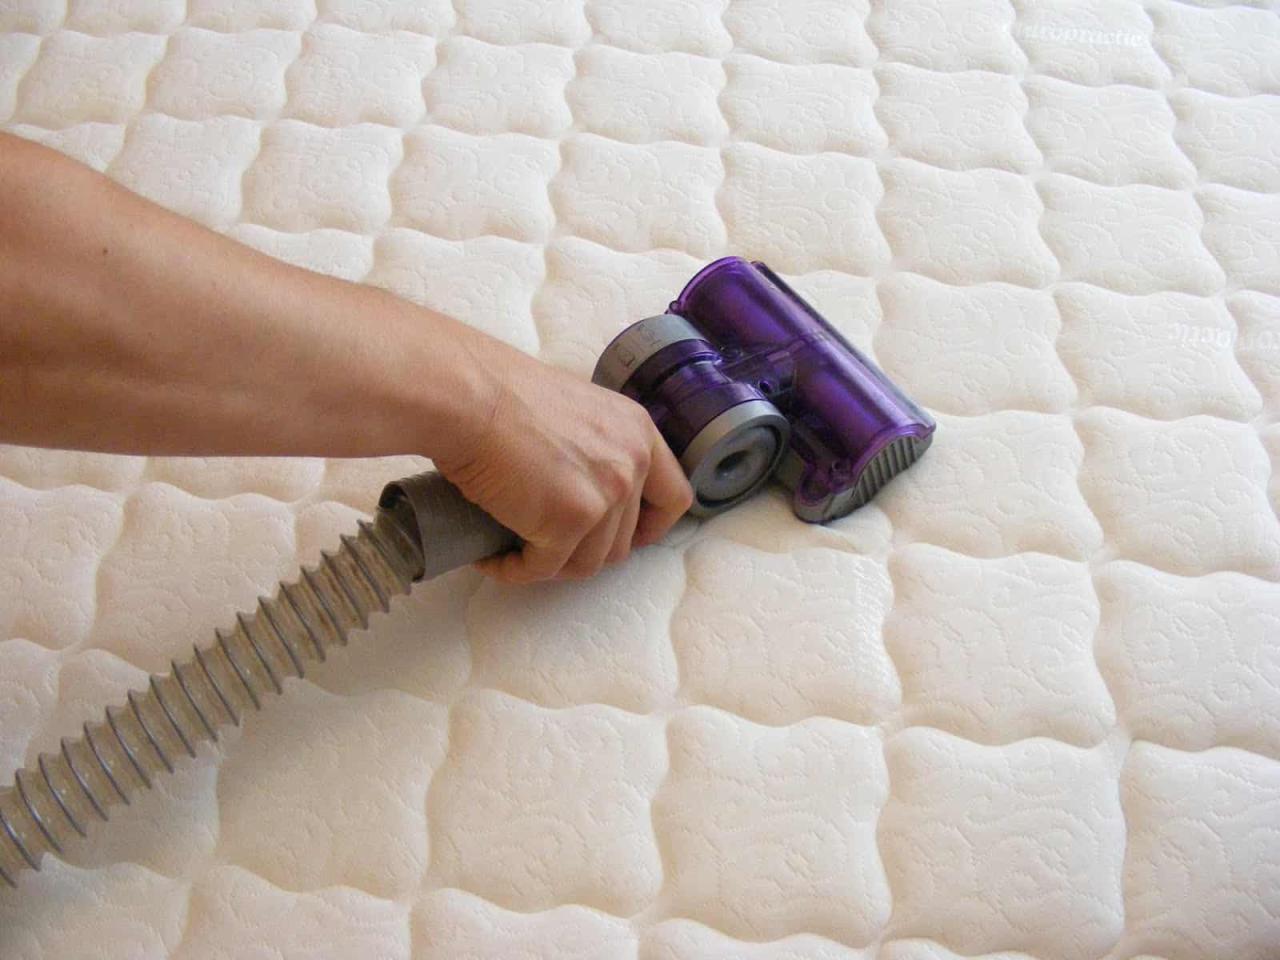 How To Clean Mattress